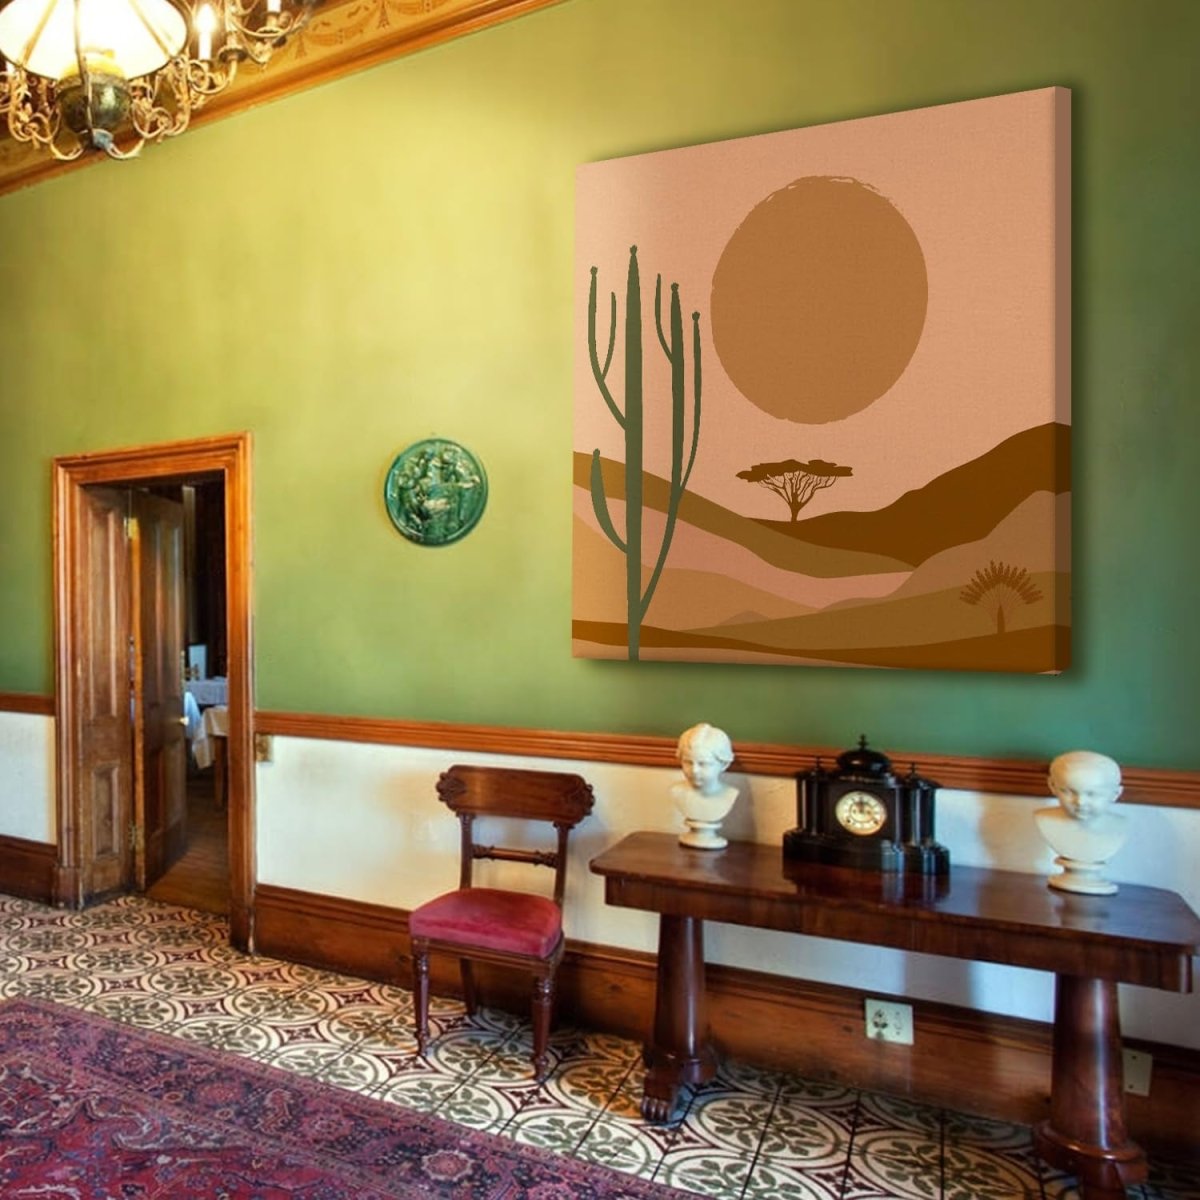 A Desert Encounter Canvas Wall Painting (36 x 36 Inches)